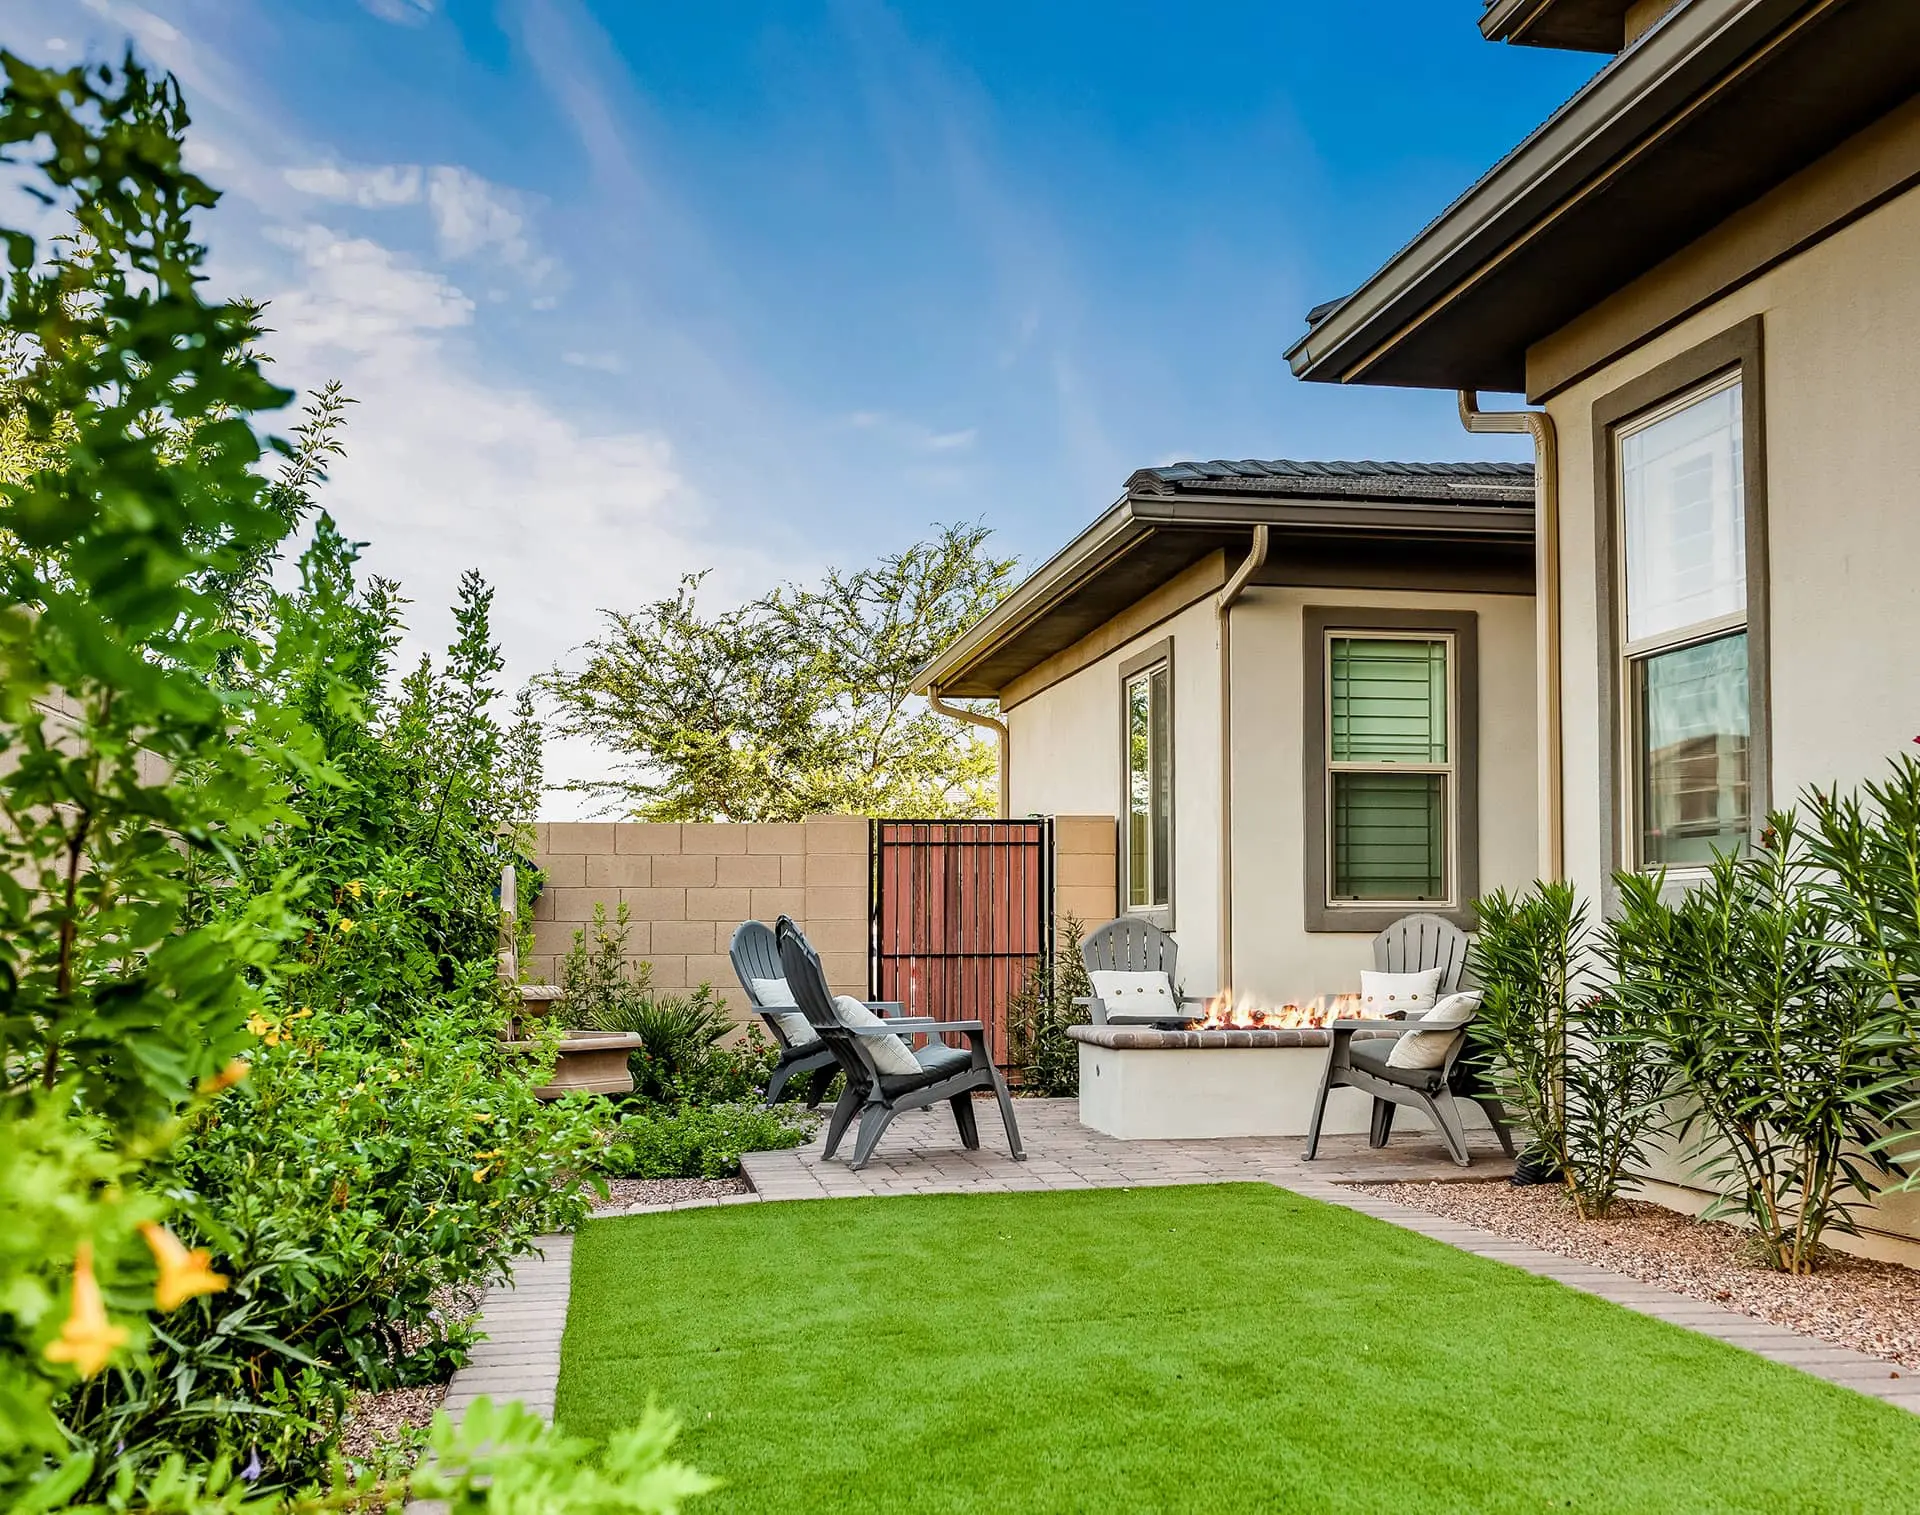 Backyard Landscaping Services In Gilbert